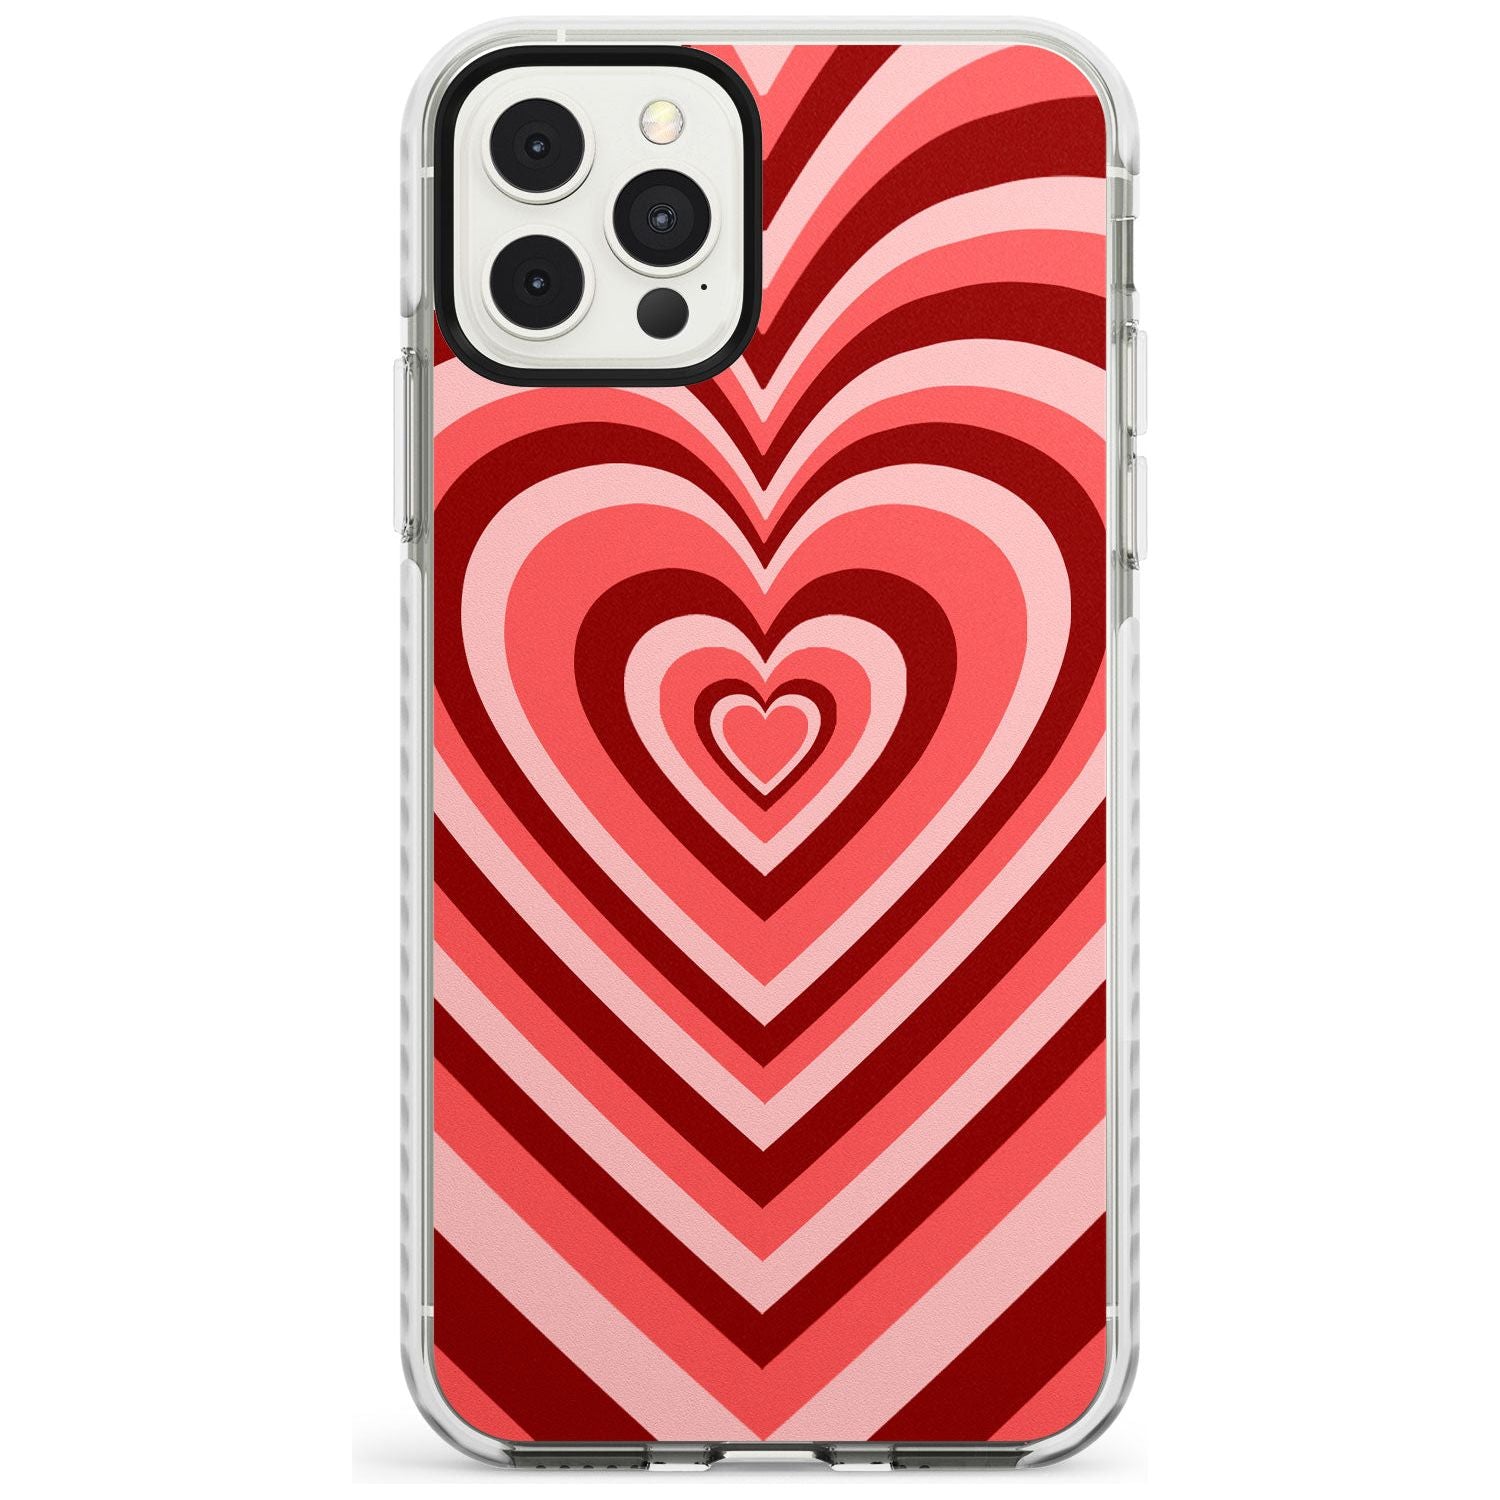 Red Heart Illusion Impact Phone Case for iPhone 11 Pro Max